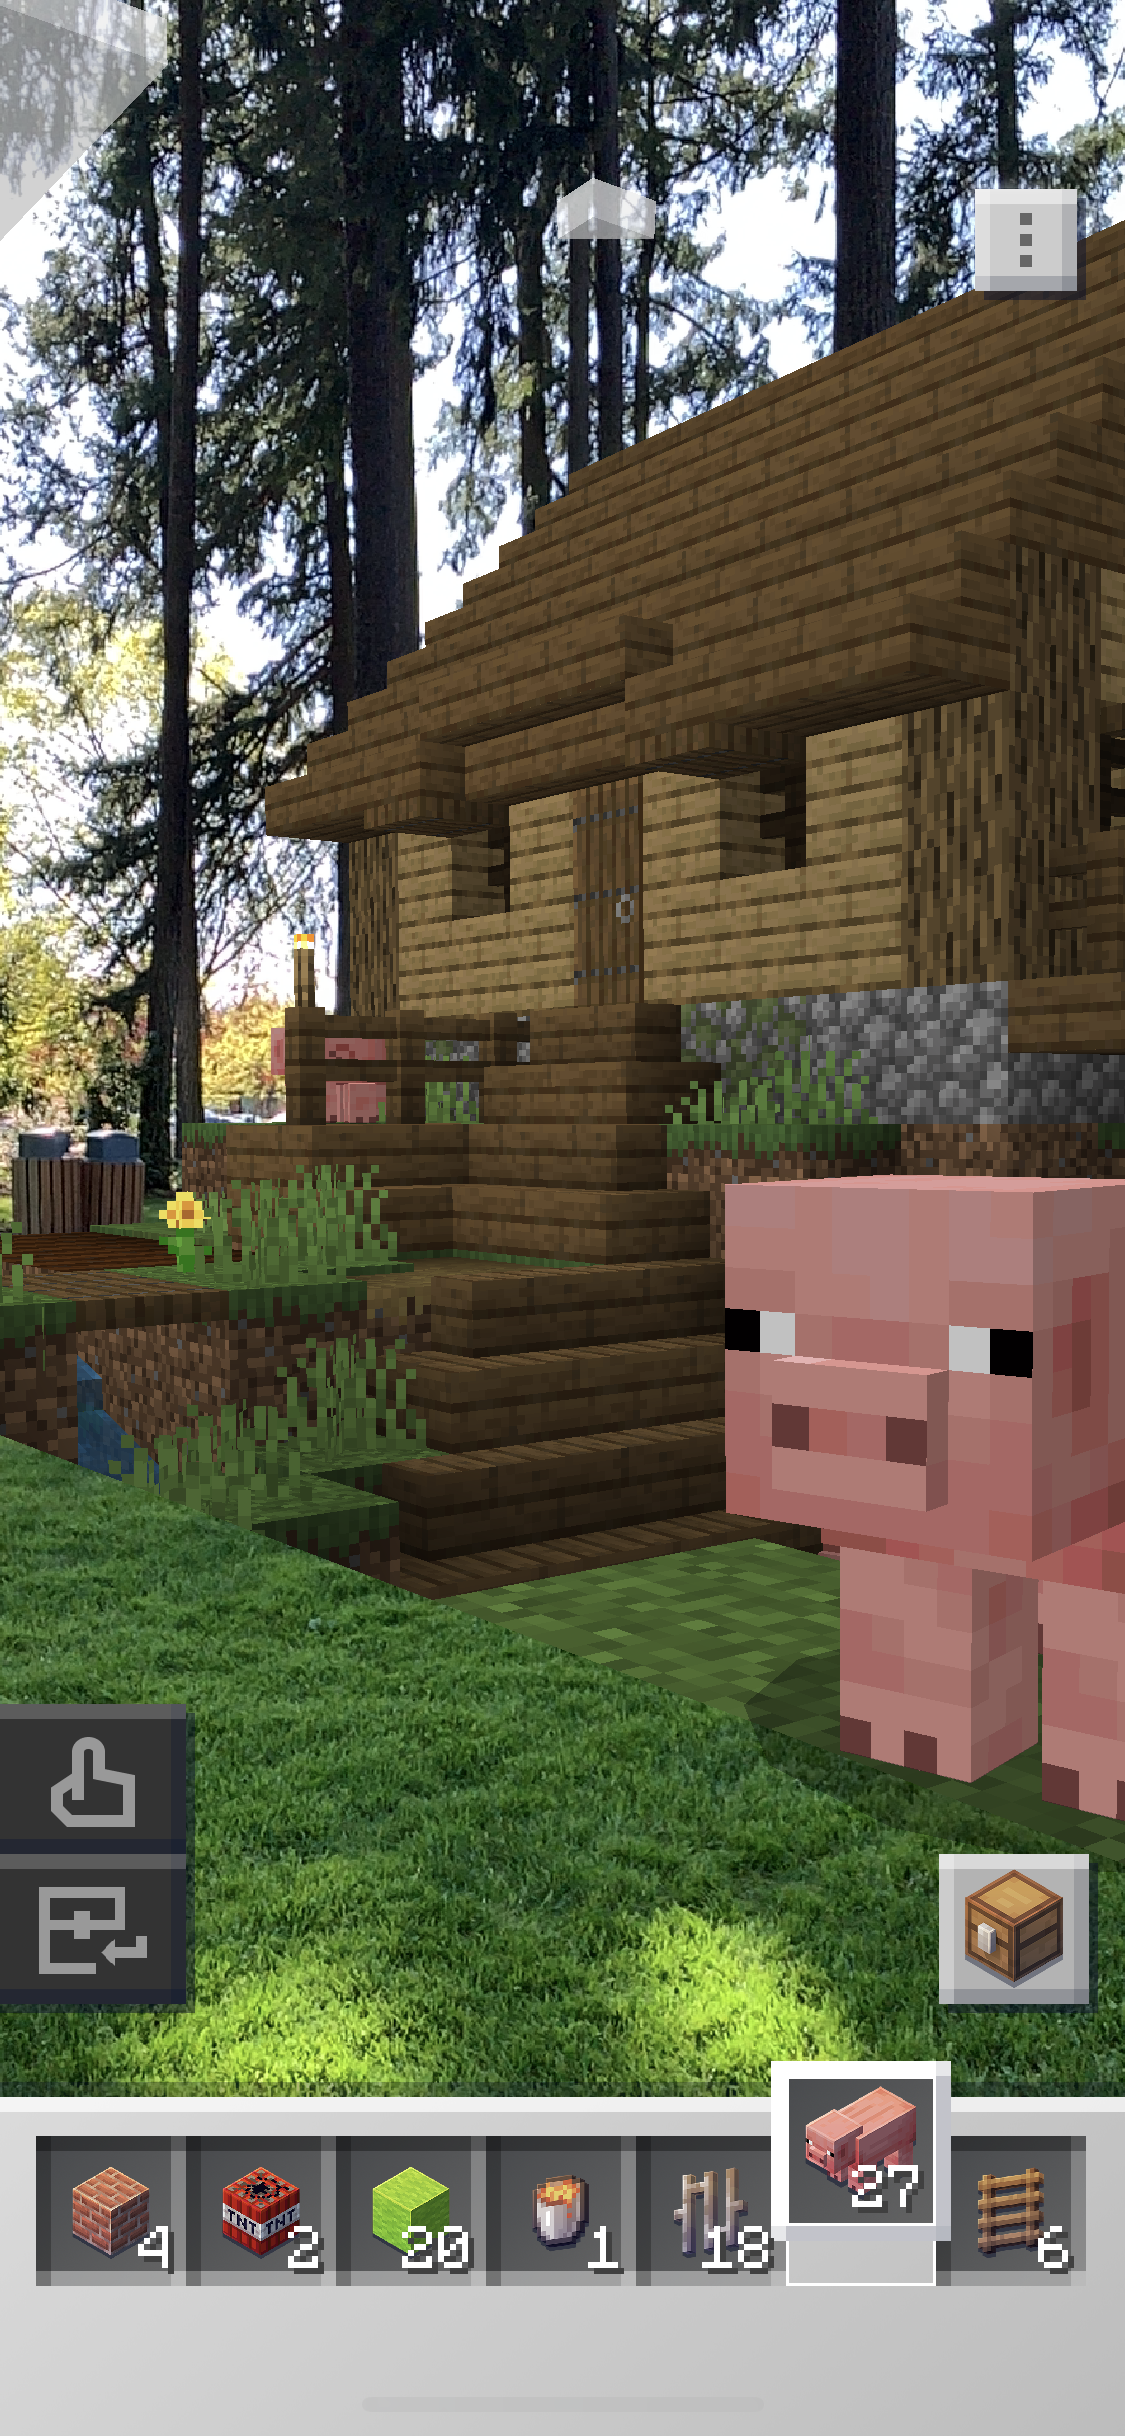 Minecraft Earth Mobs in the Park